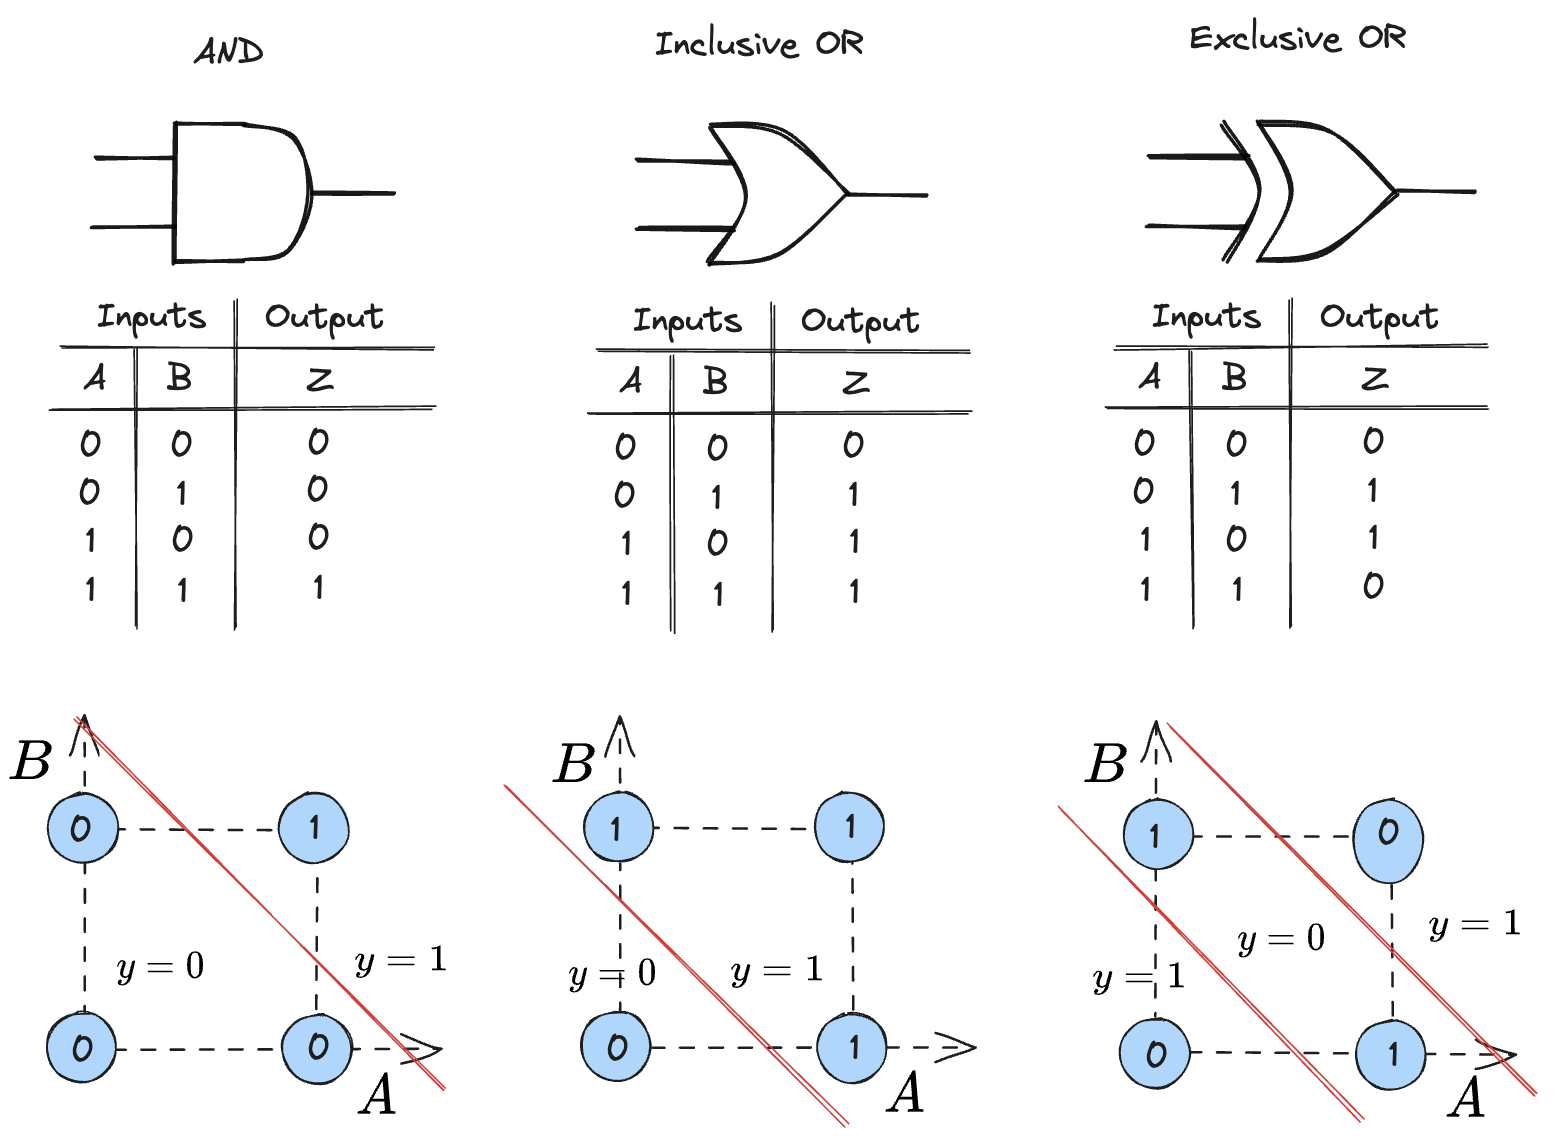 An image of logic gates acting as linear classifiers